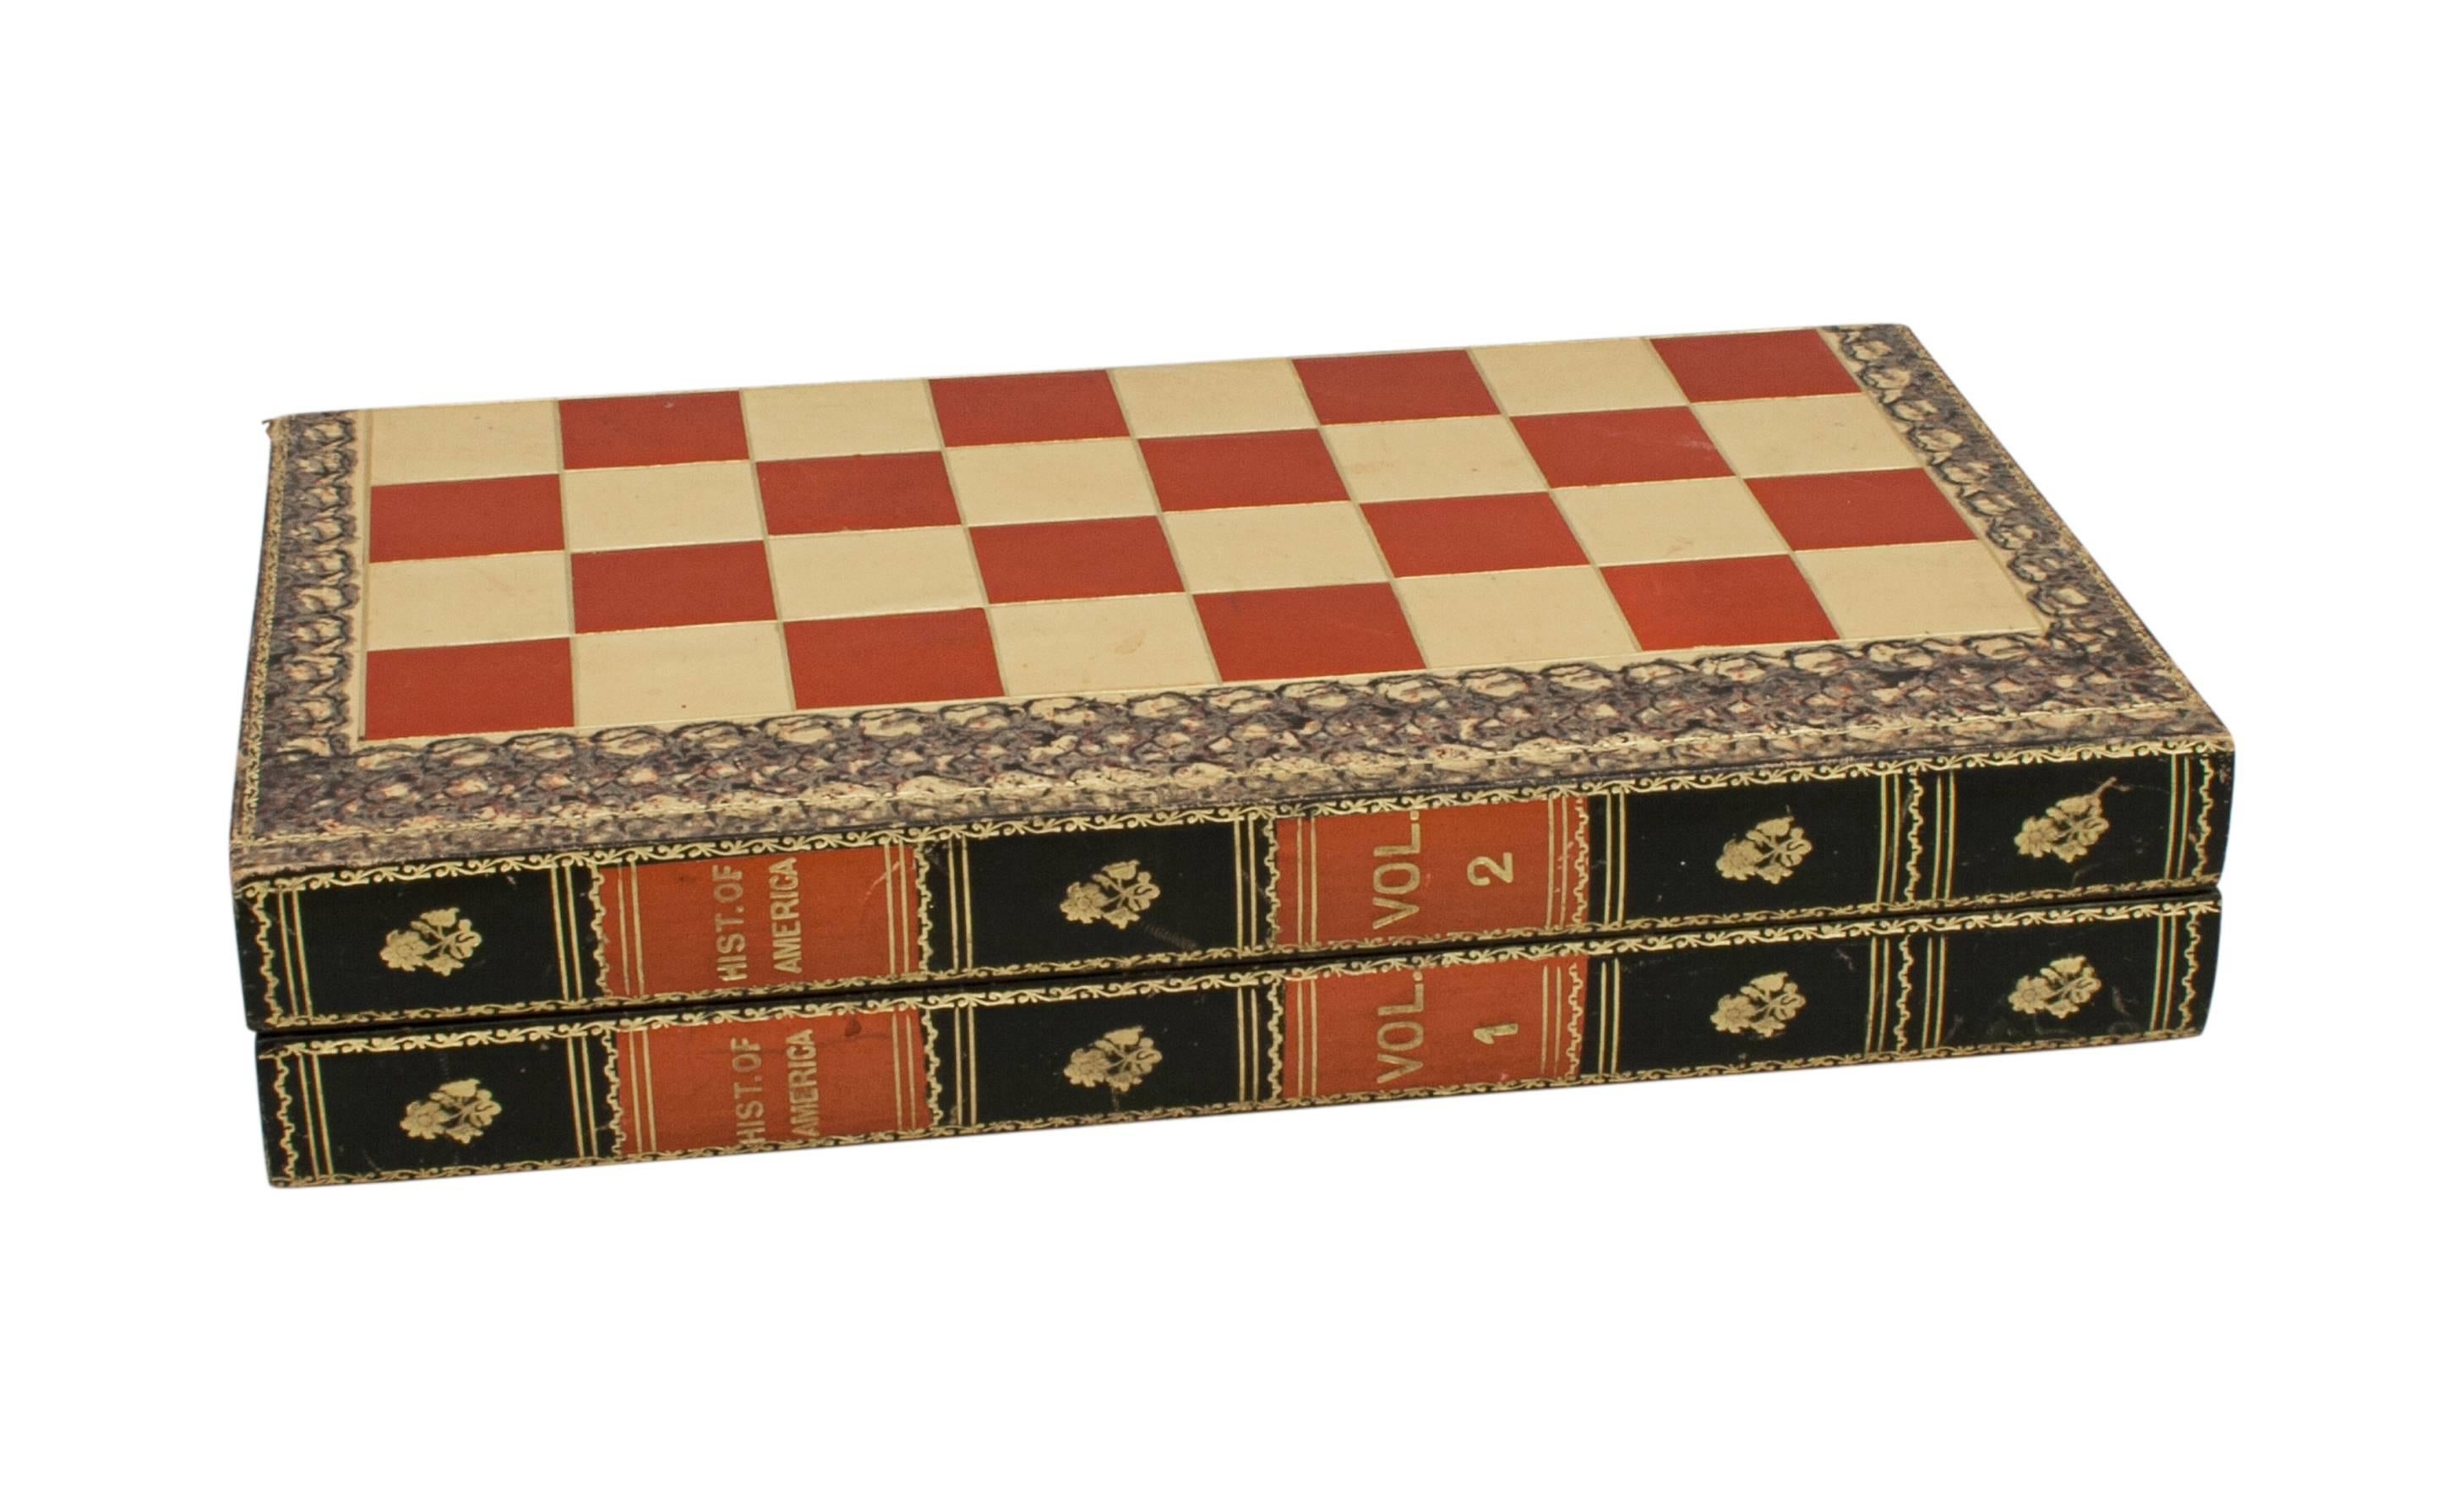 Backgammon, chess and droughts board.
A morocco bound backgammon and droughts board in a folding blind-book form. The chess board made of cream and red leather squares with nice gilt tooling. The spine of the box entitled: Hist. of America Vol 1 &